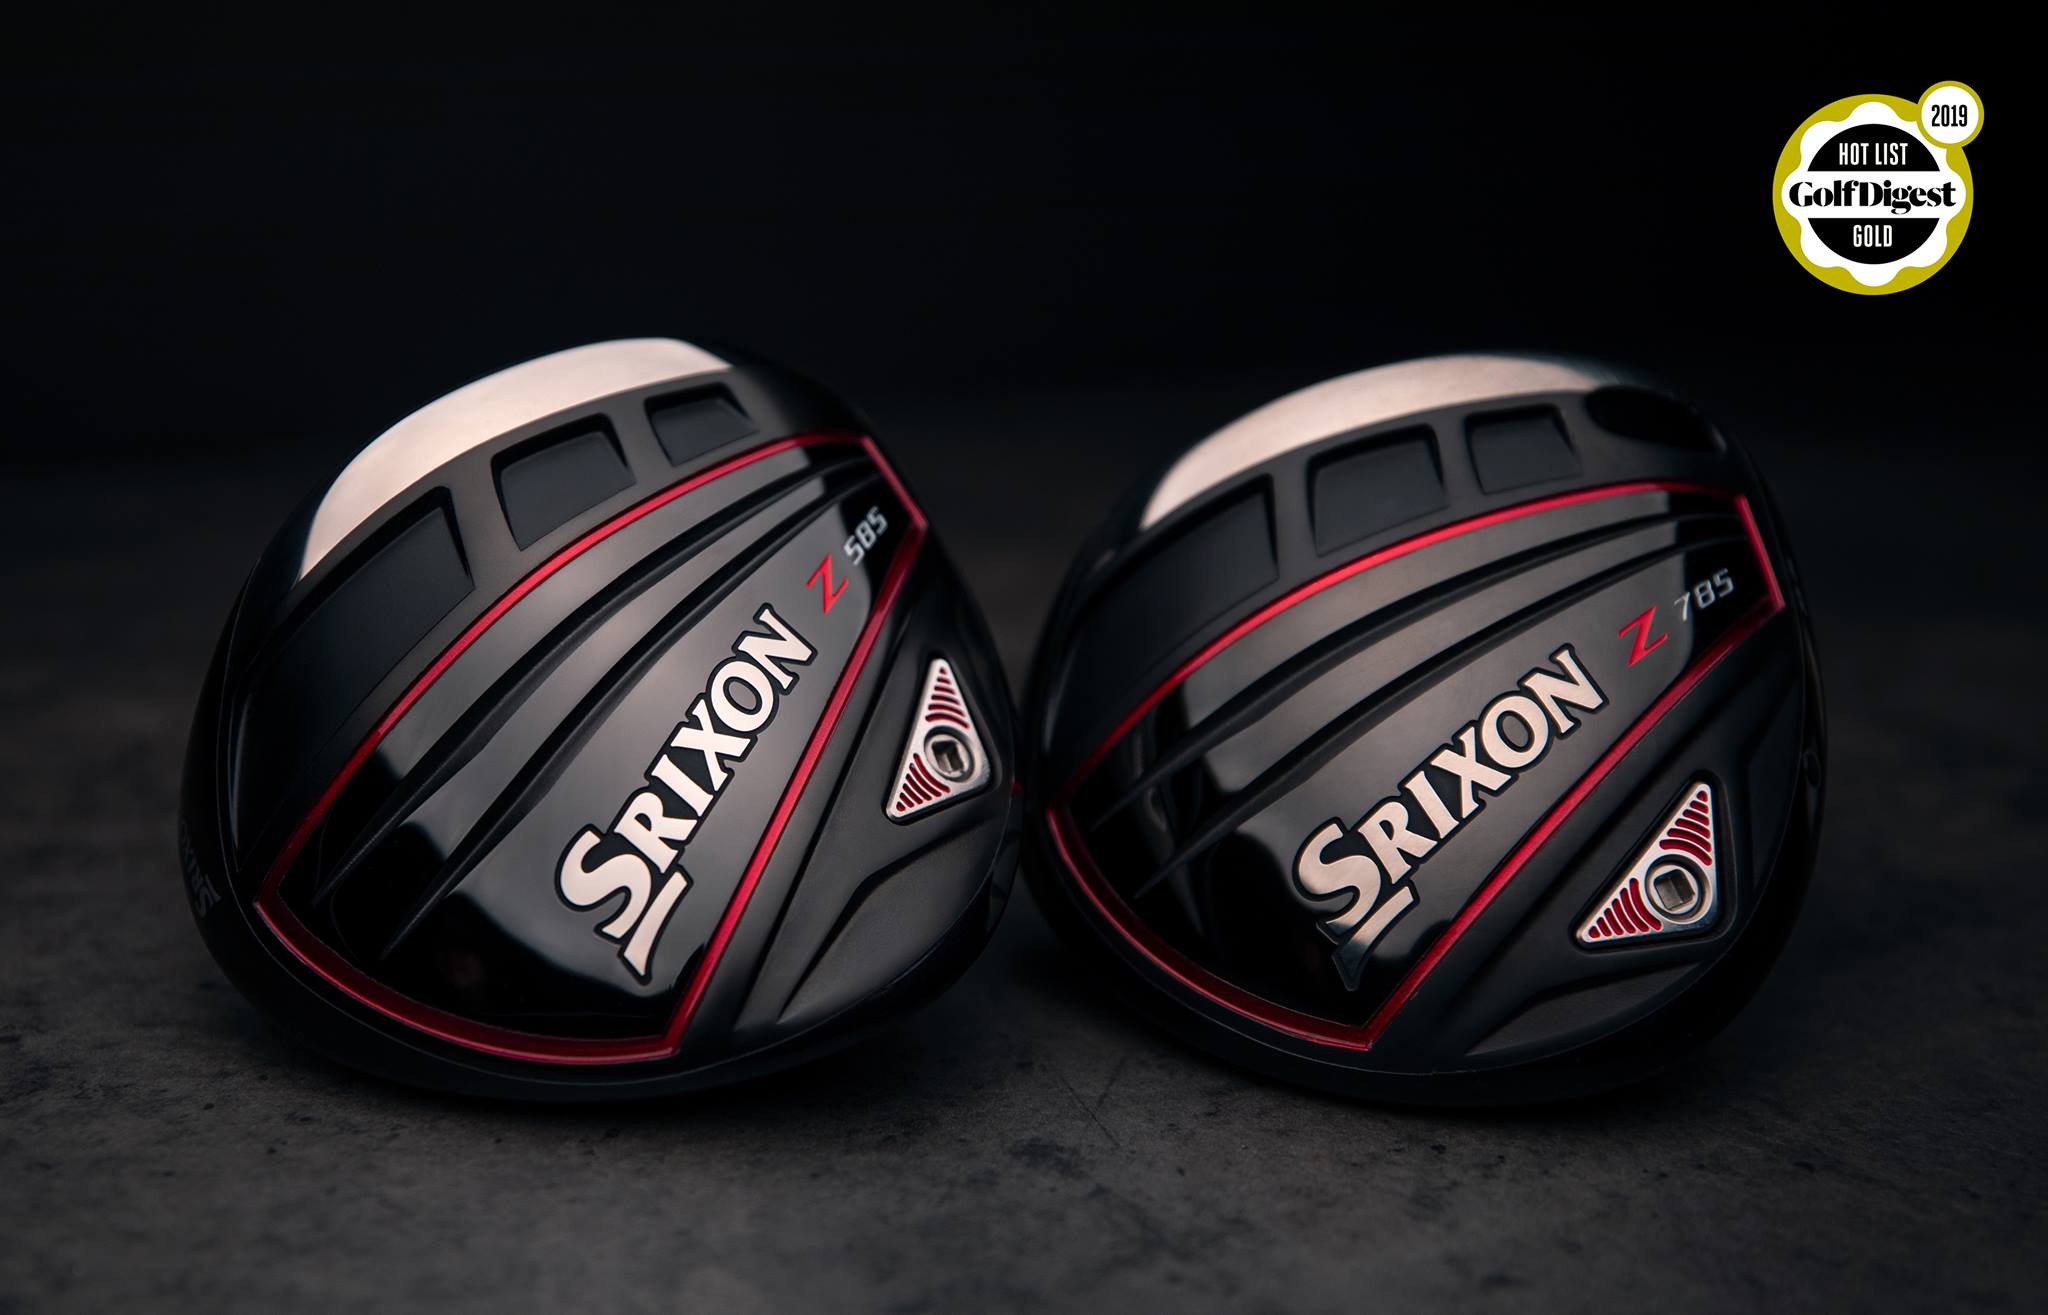 Srixon Golf Demo Day at Carls Golfland - March 23rd